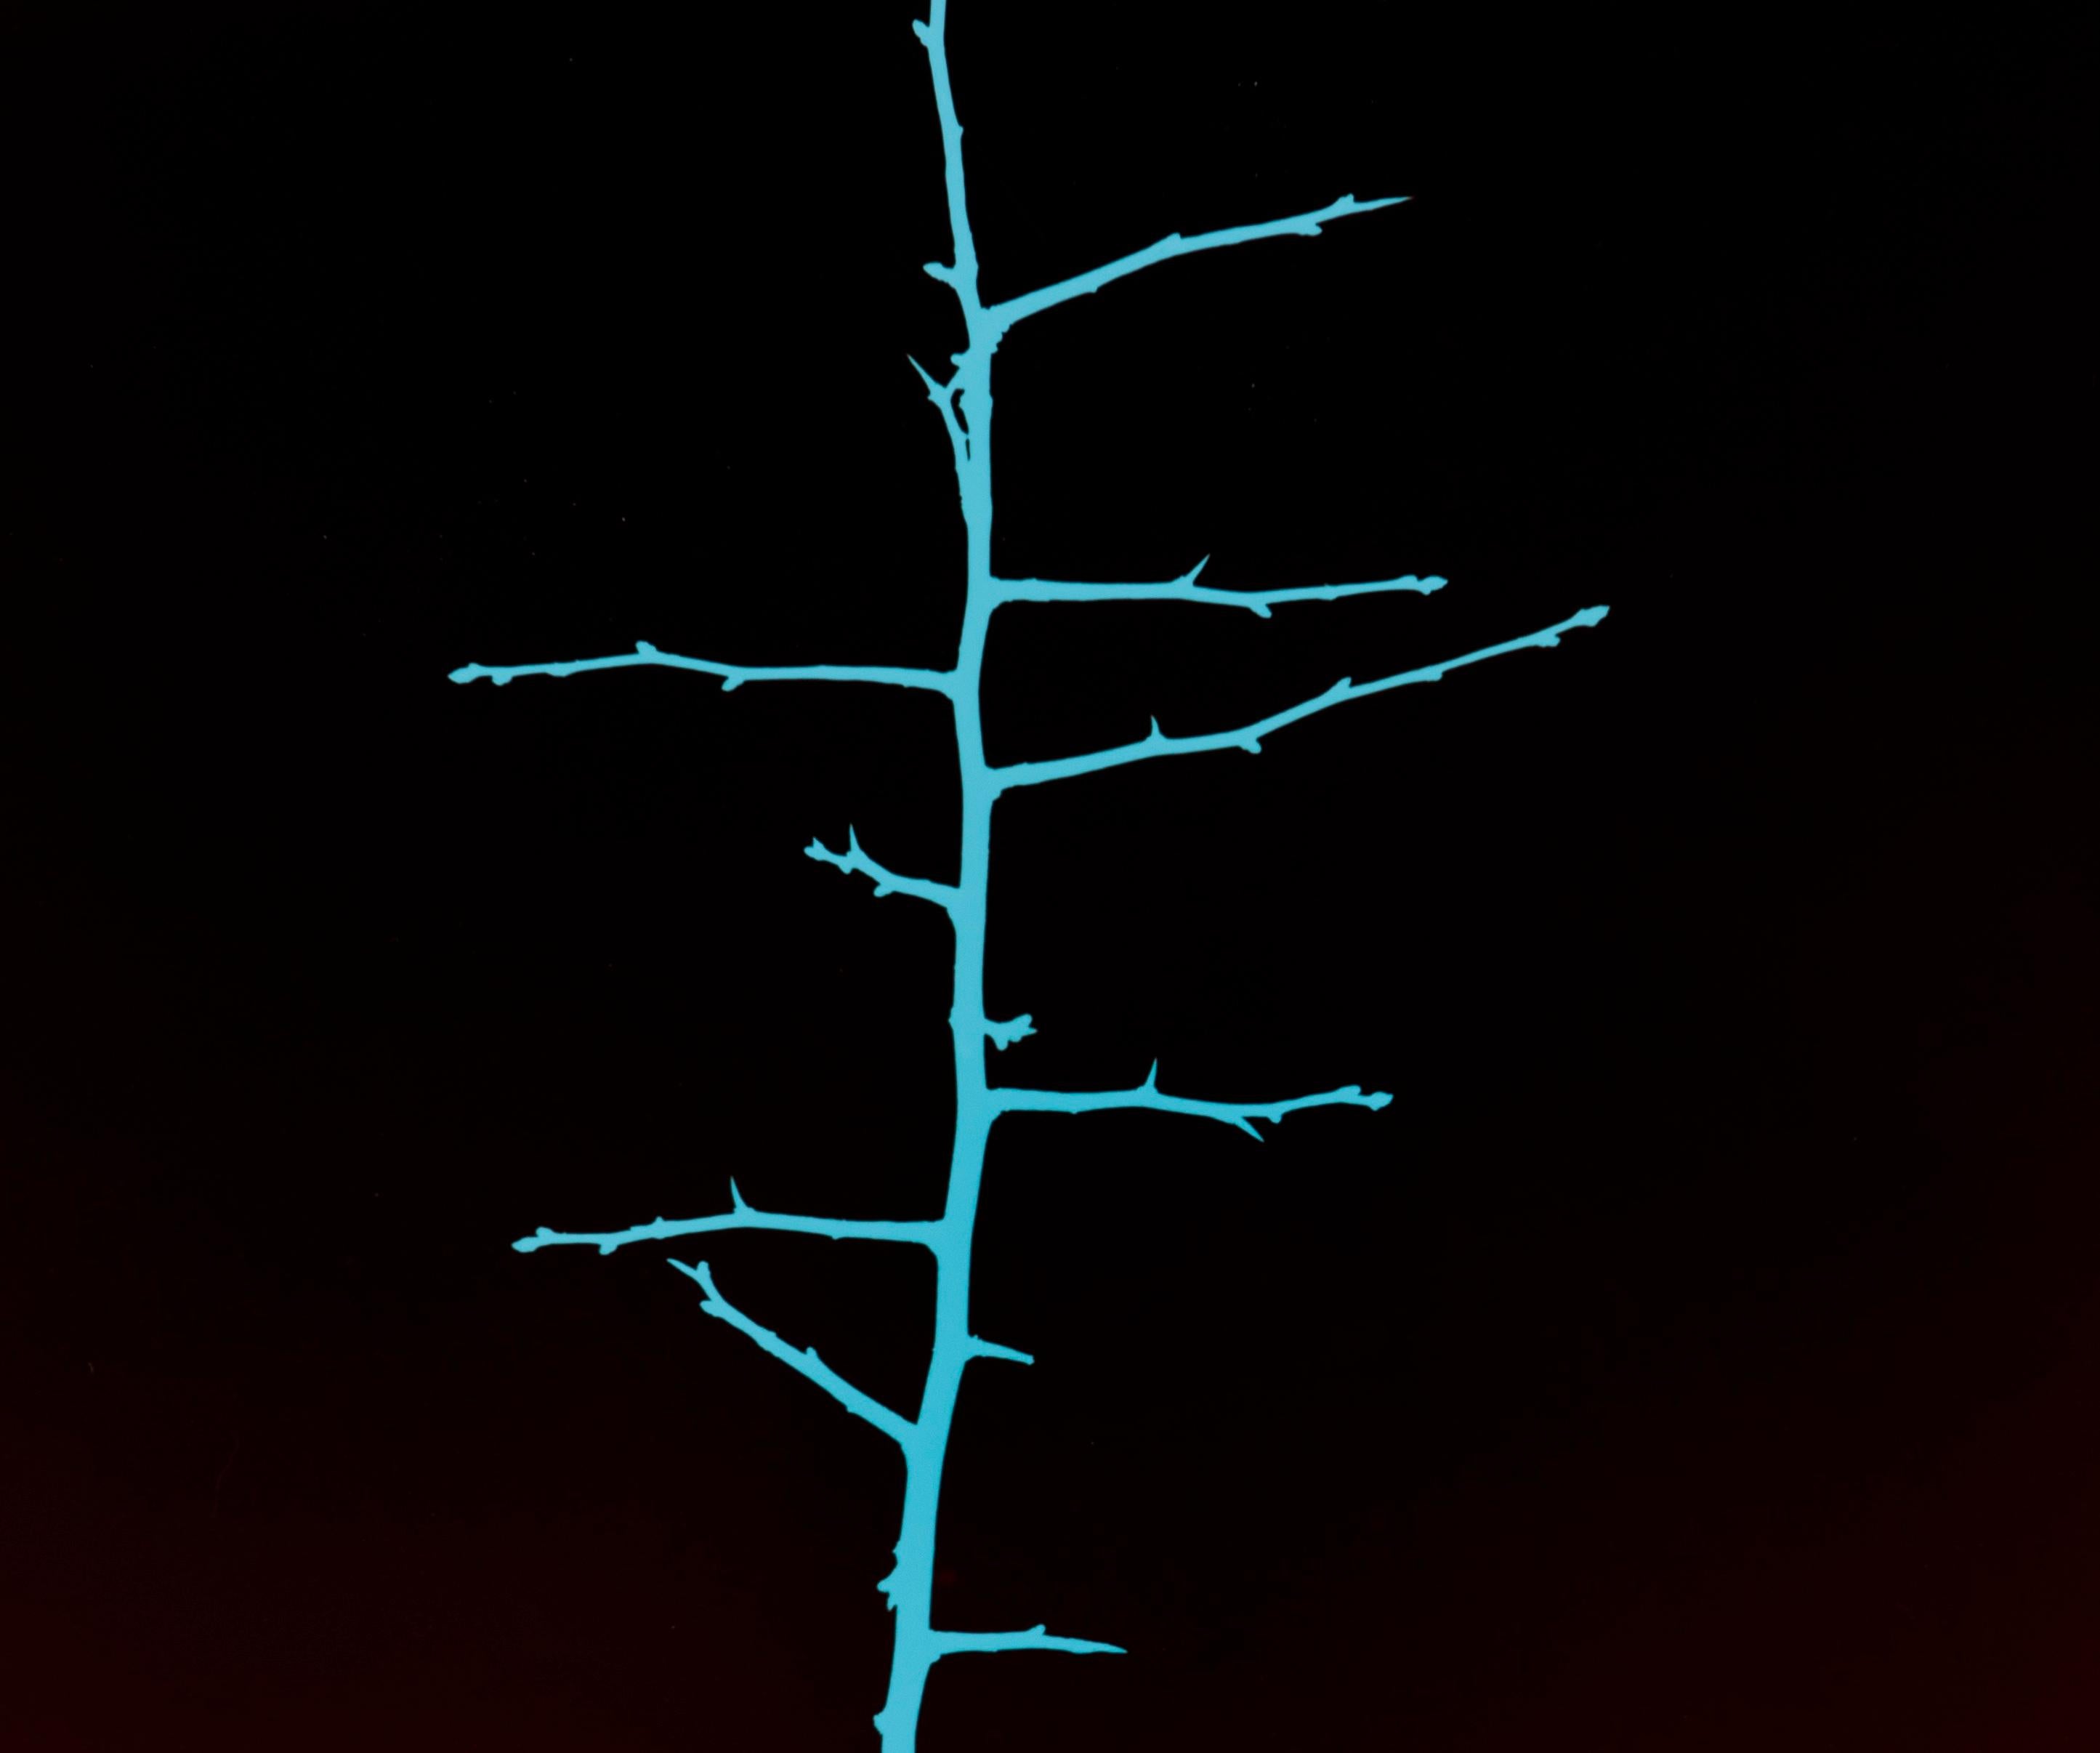 Trees (Nr. 9/2) - Black and Turquoise Blackthorn Branch Photogram - Photograph by Regina Hügli